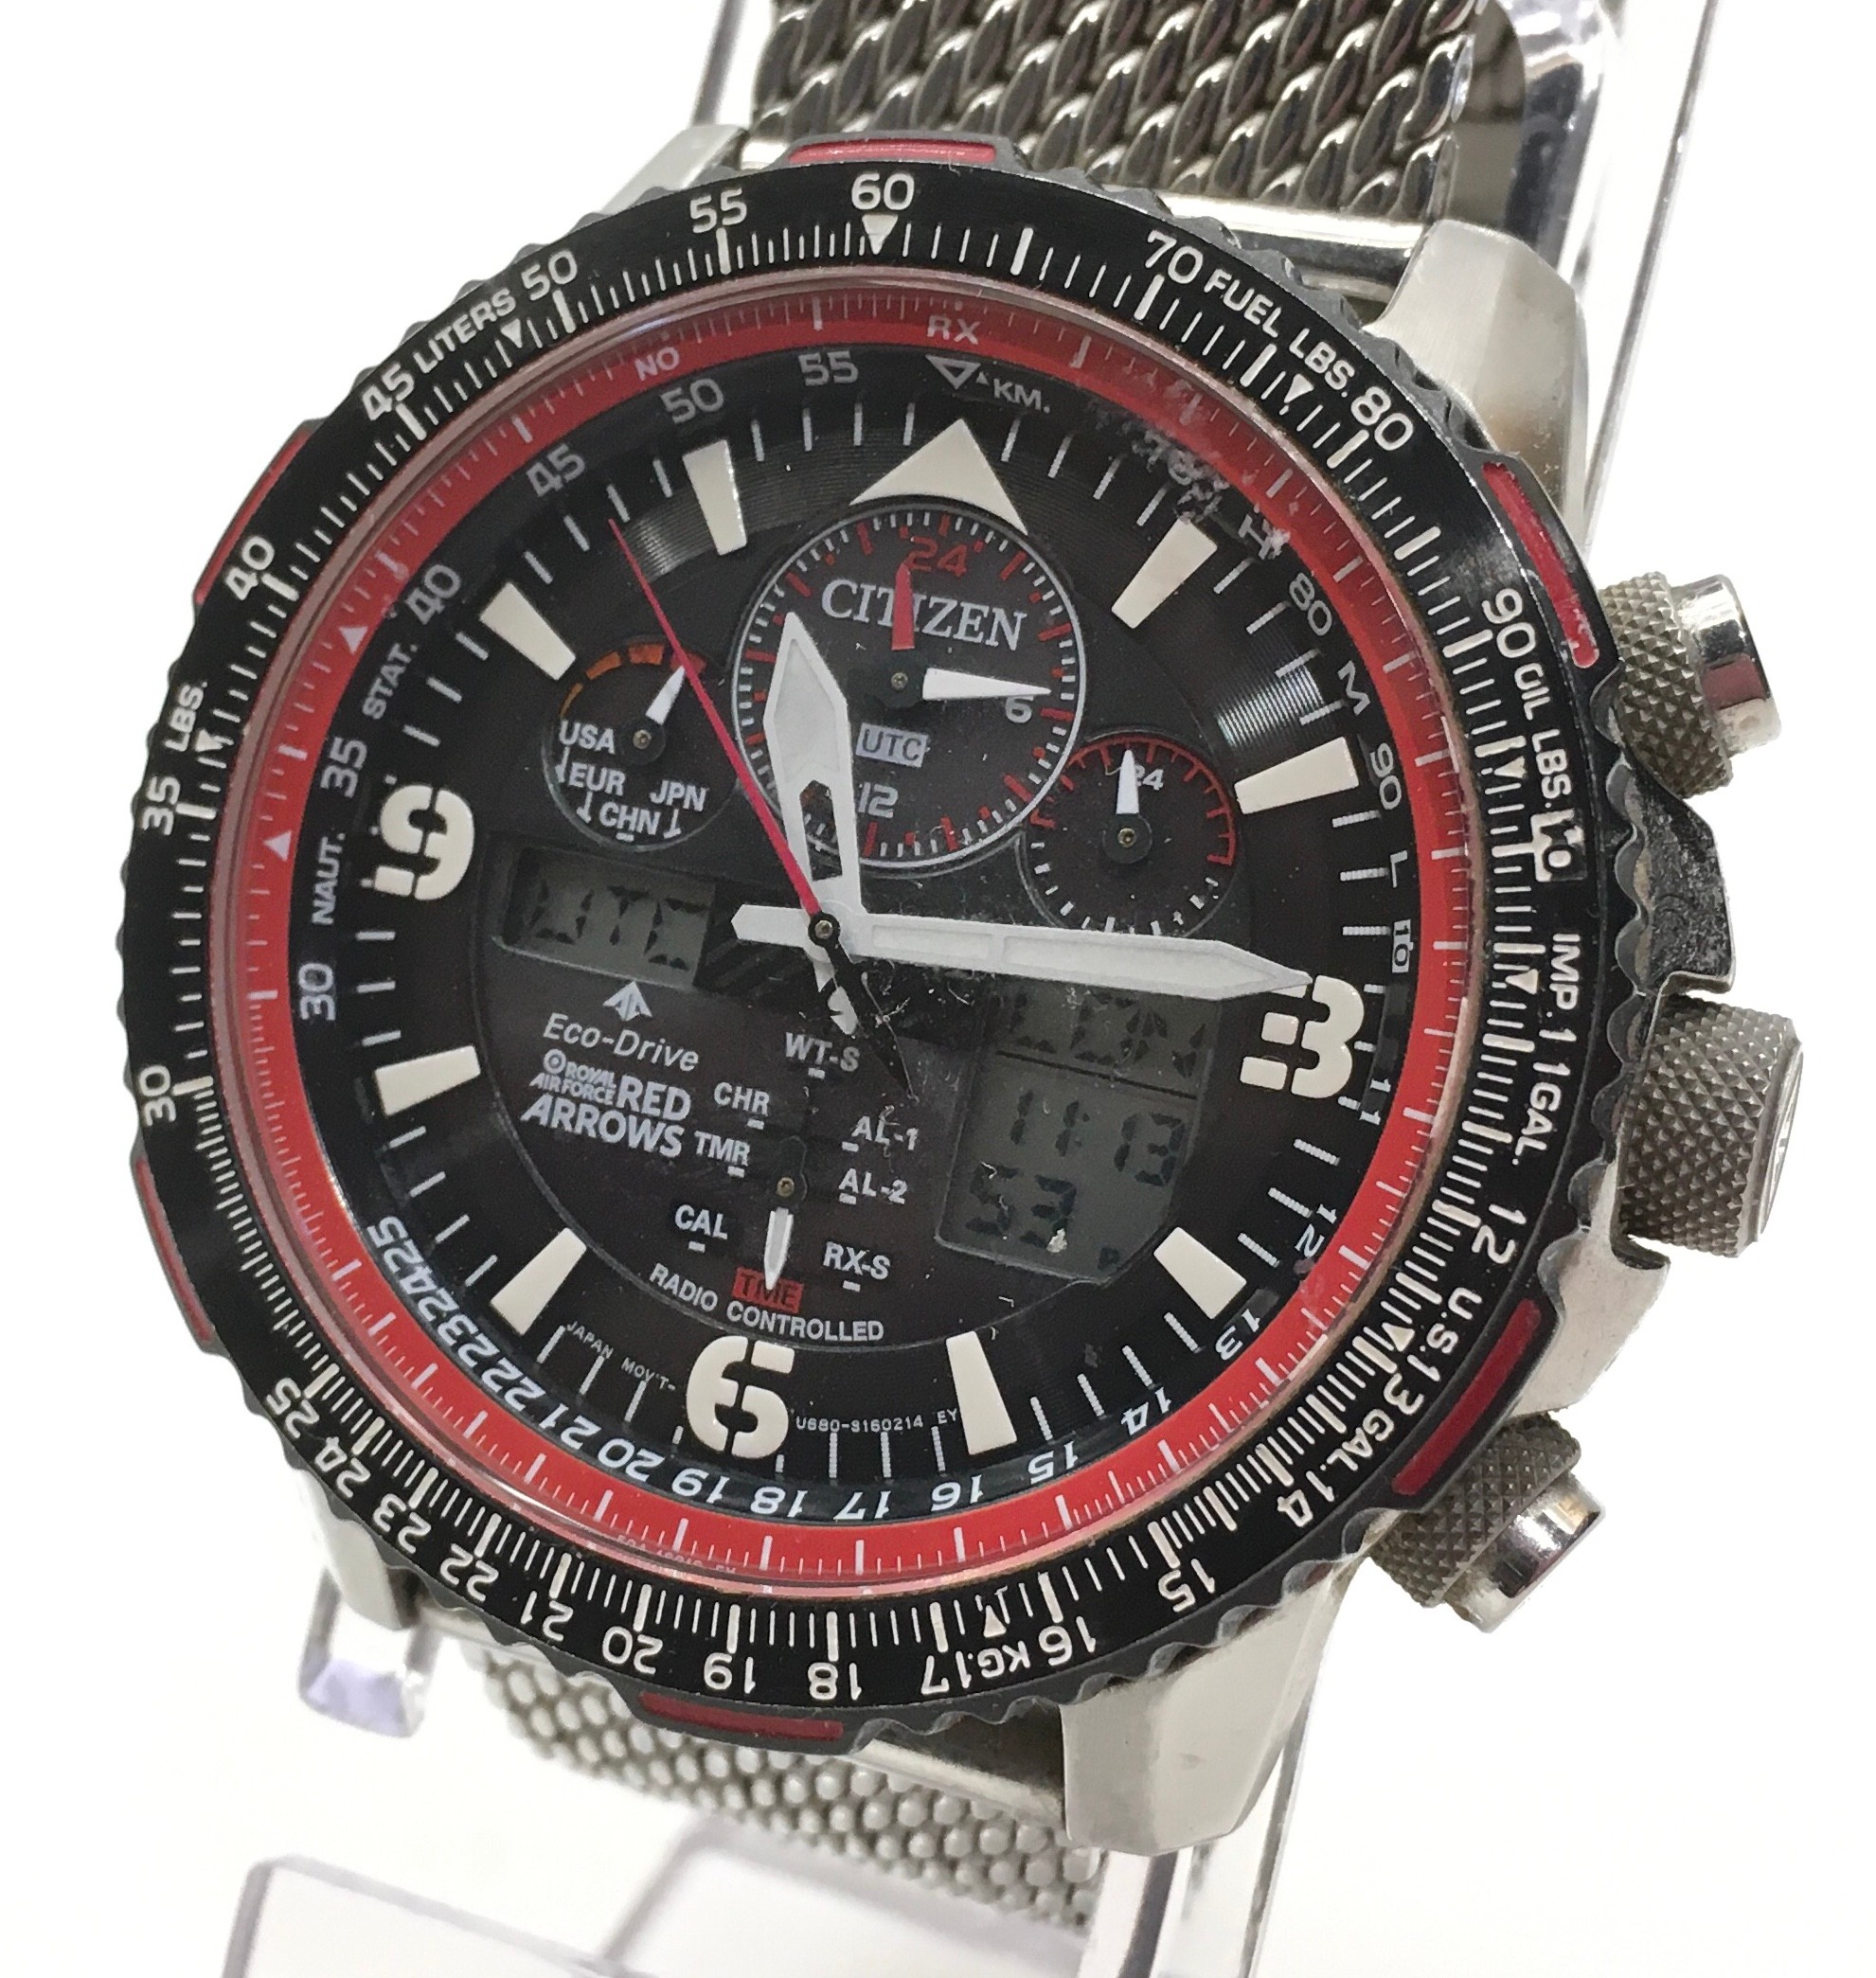 Collectible gents Citizen Eco-Drive Red Arrows chronograph. Model U680 S116819. Limited edition - Image 2 of 6